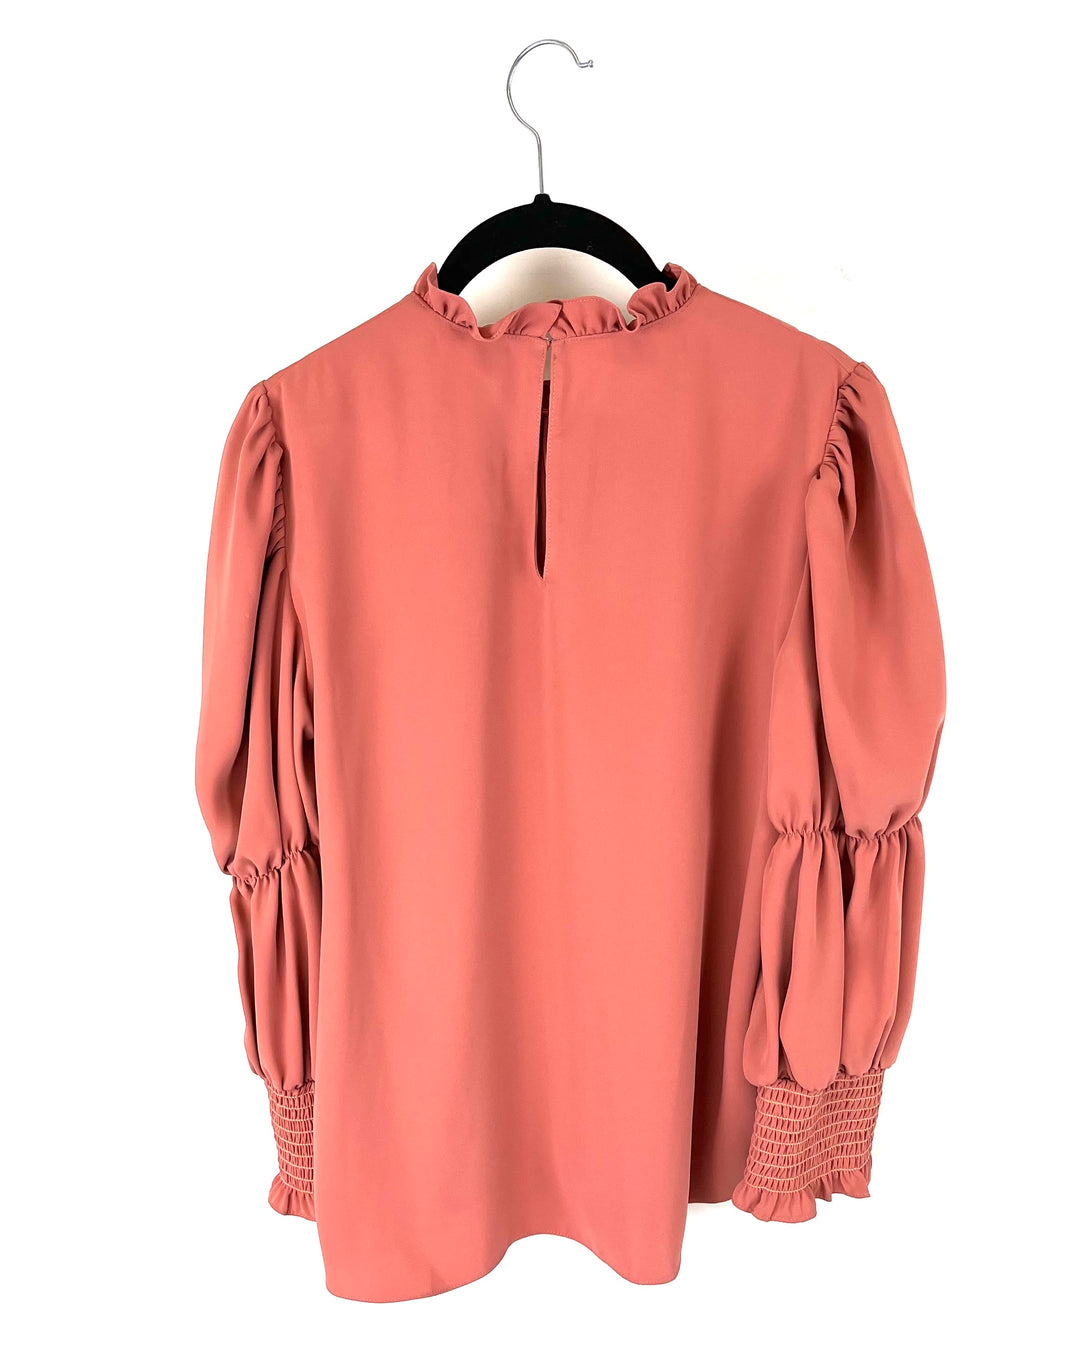 Salmon Colored Long Sleeve Blouse - Small